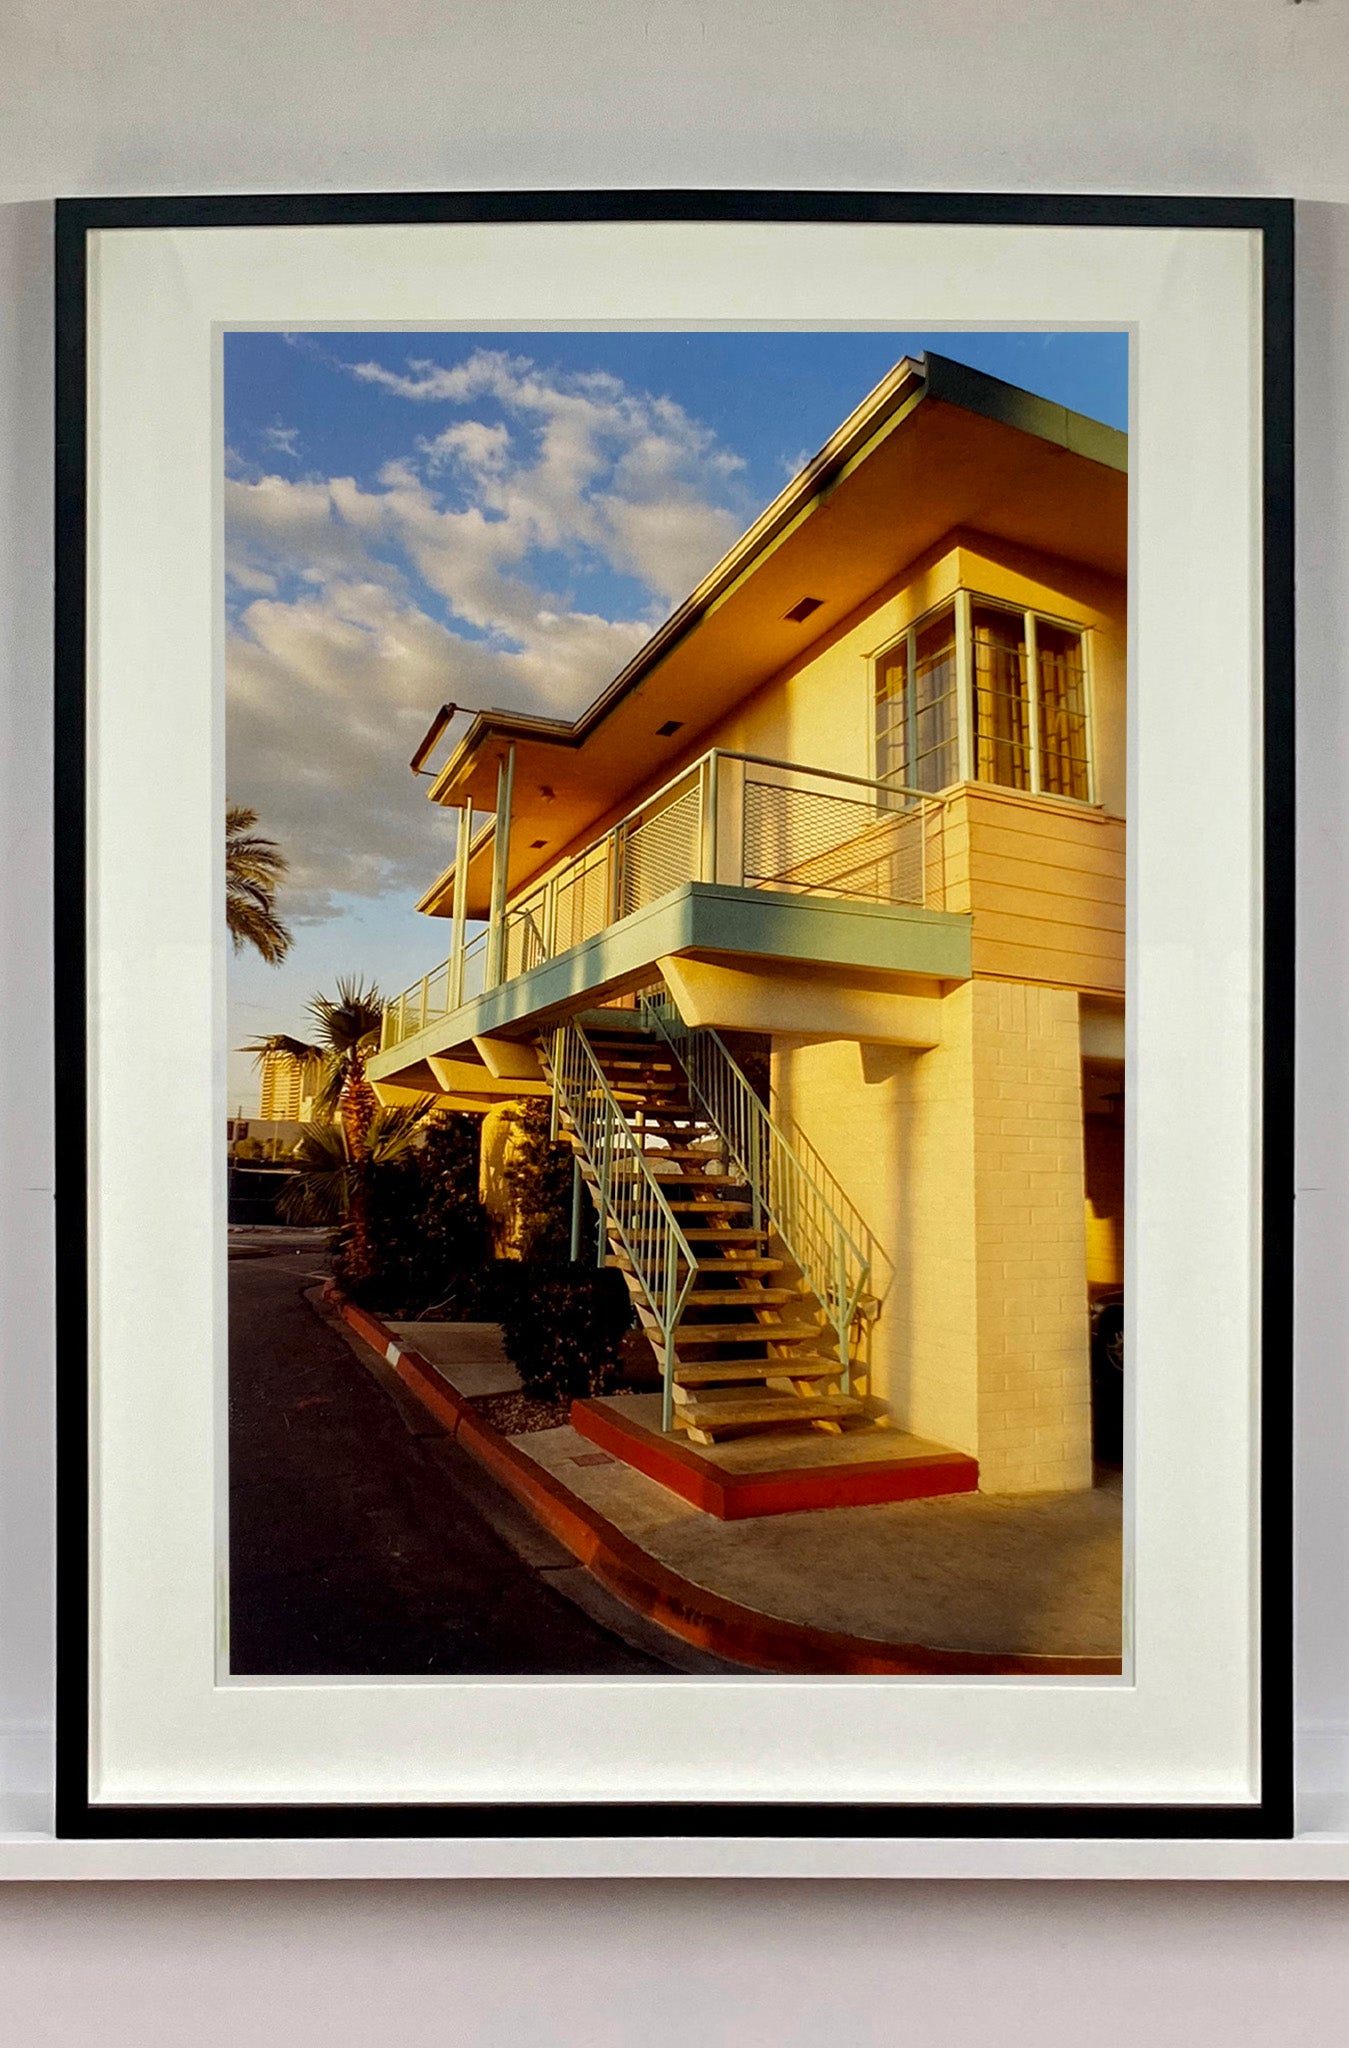 Algiers Motel Apartments, which demonstrates Las Vegas' authentic mid-century architecture, is sadly now just another example of 'lost Vegas'. It was photographed by Richard Heeps for his 'Dream in Colour' series.